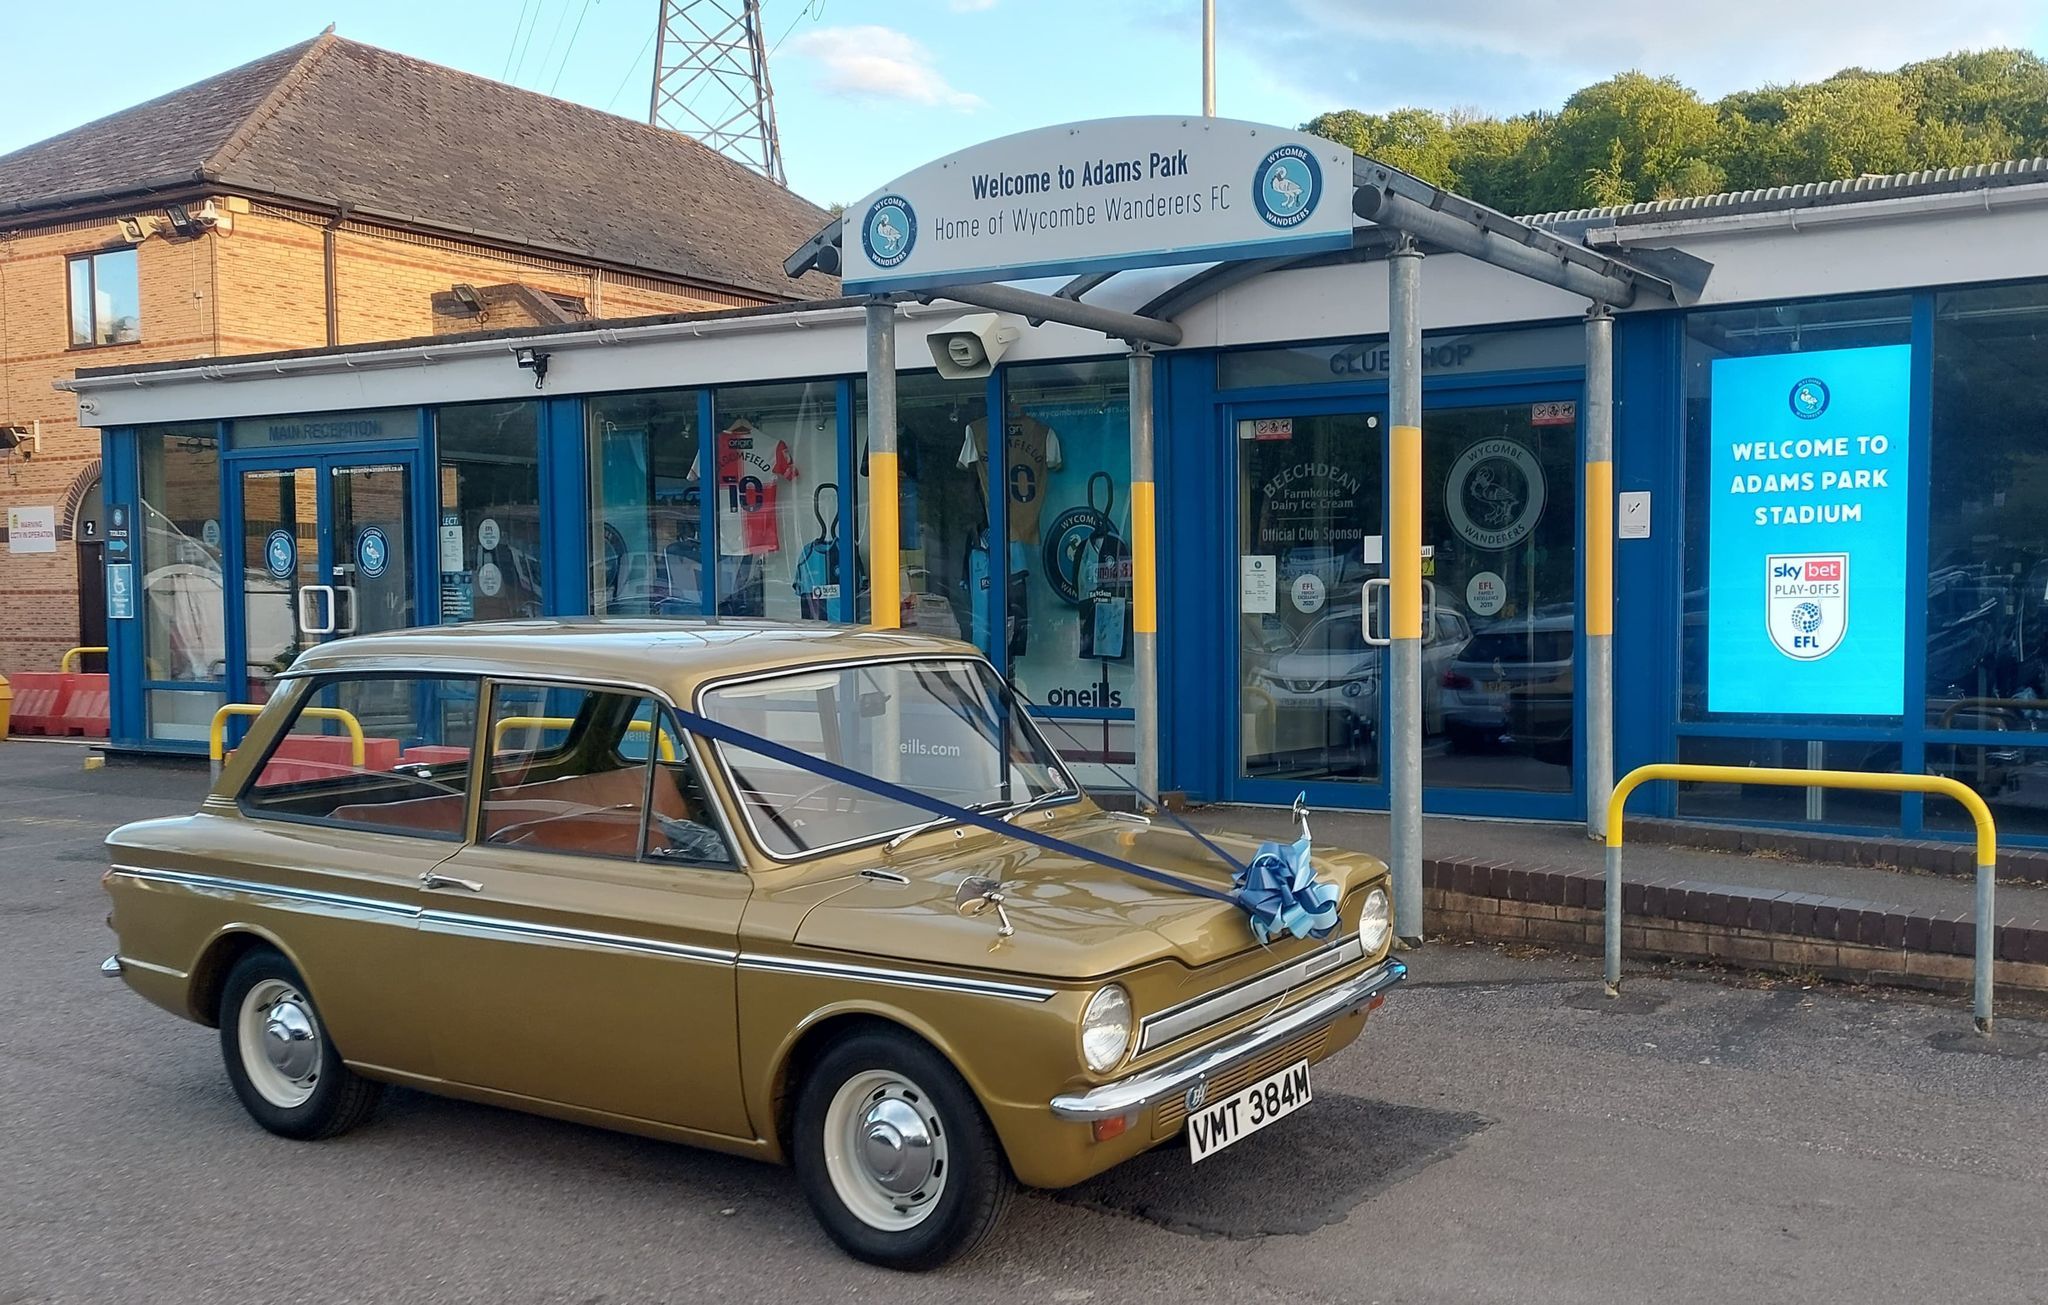 A 1974 Hillman Imp with light and dark blue ribbons was seen outside Adams Park on the day of final 